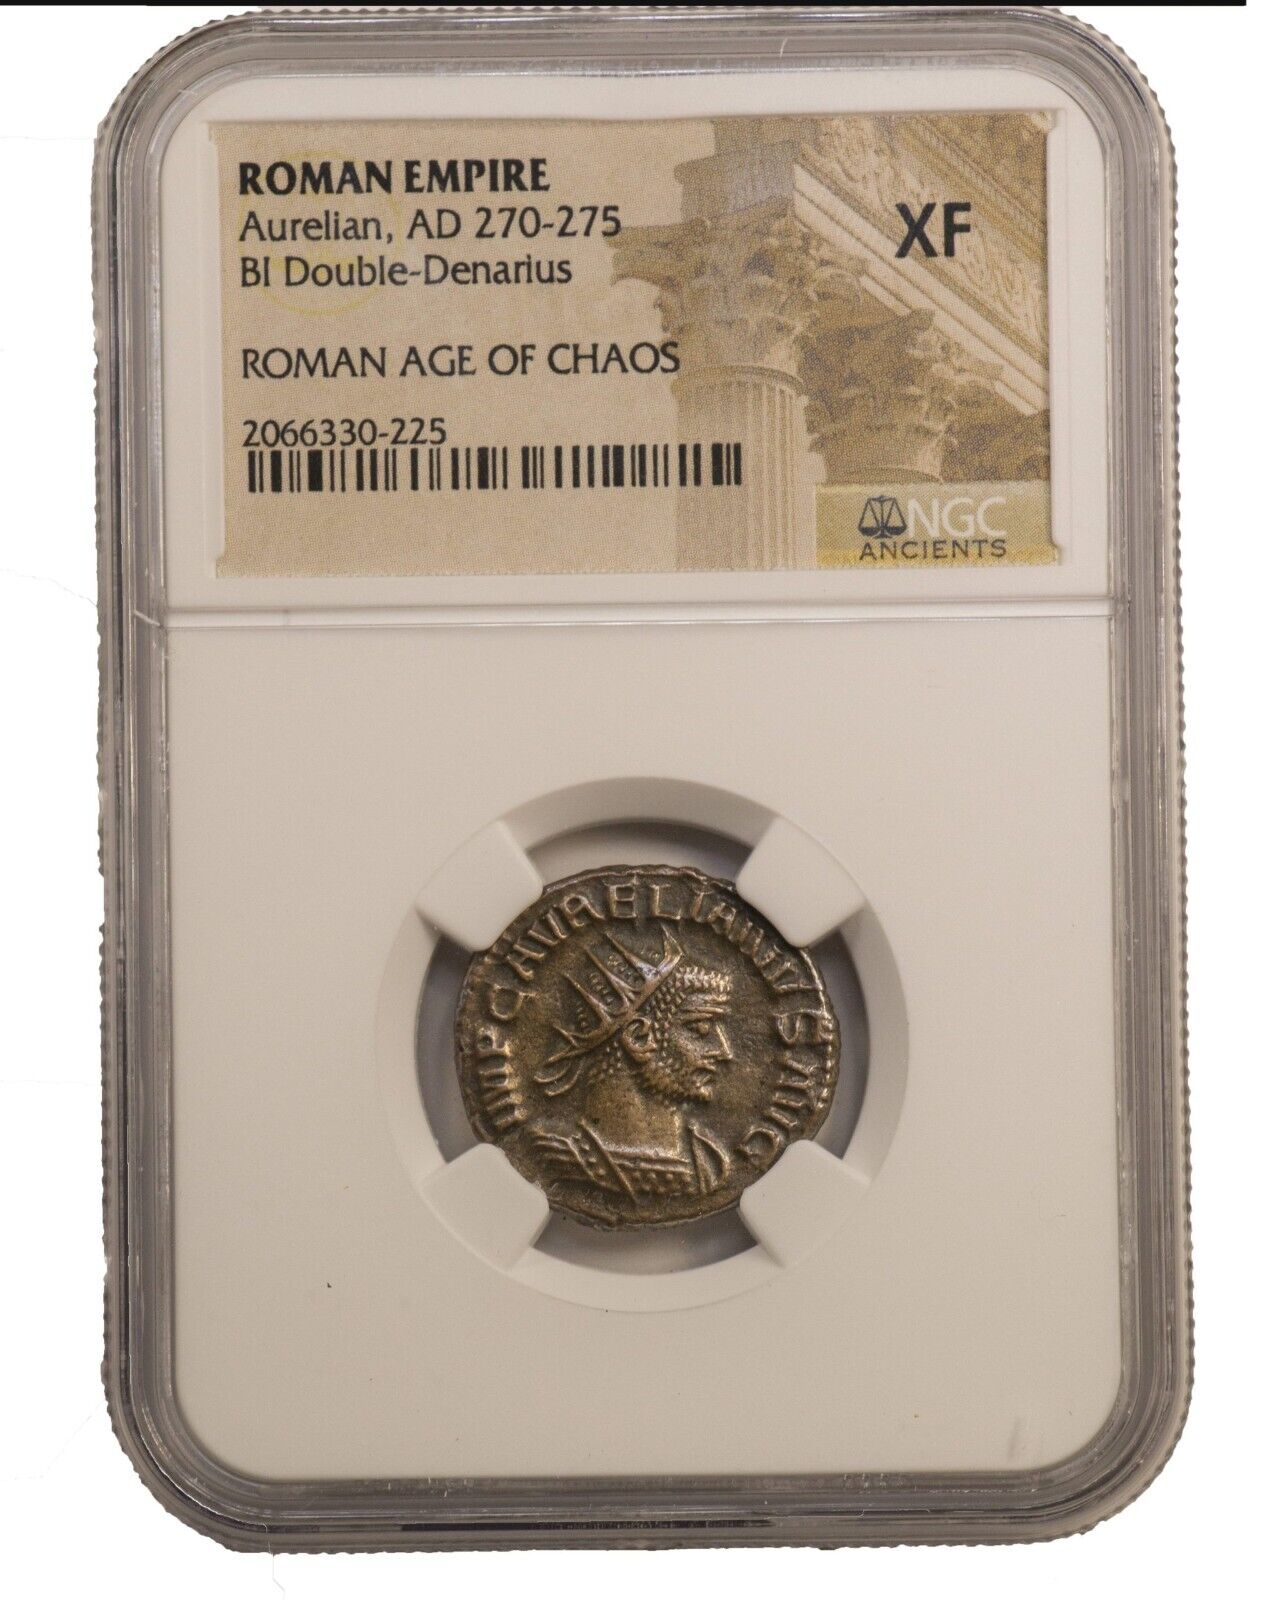 NGC XF EXTREMELY FINE Roman AE of Aurelian (AD 270-275) Father of Christmas